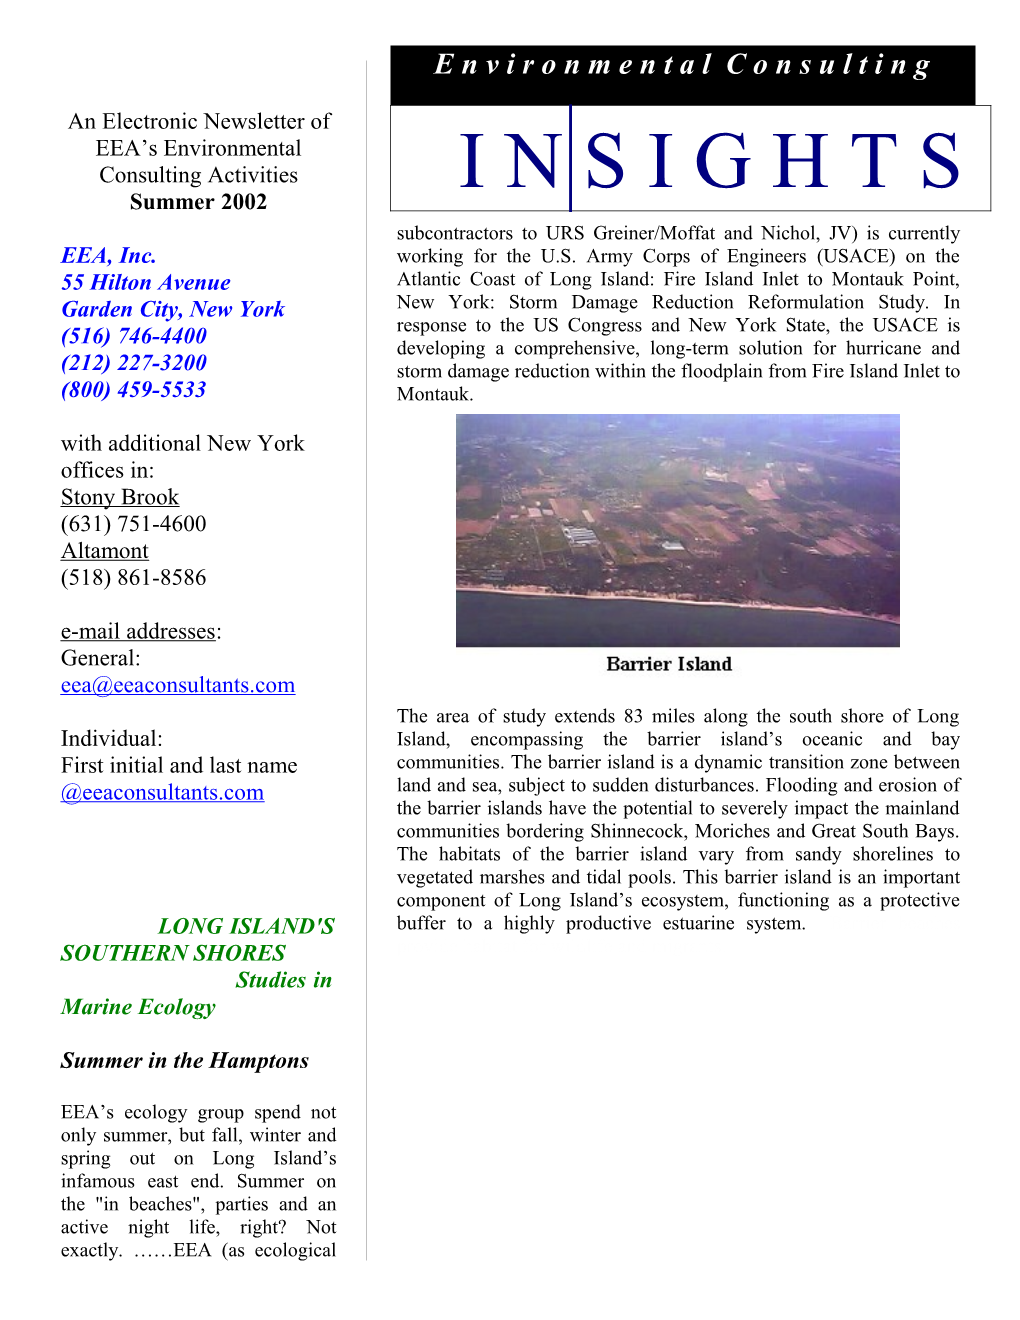 An Electronic Newsletter of EEA S Environmental Consulting Activities